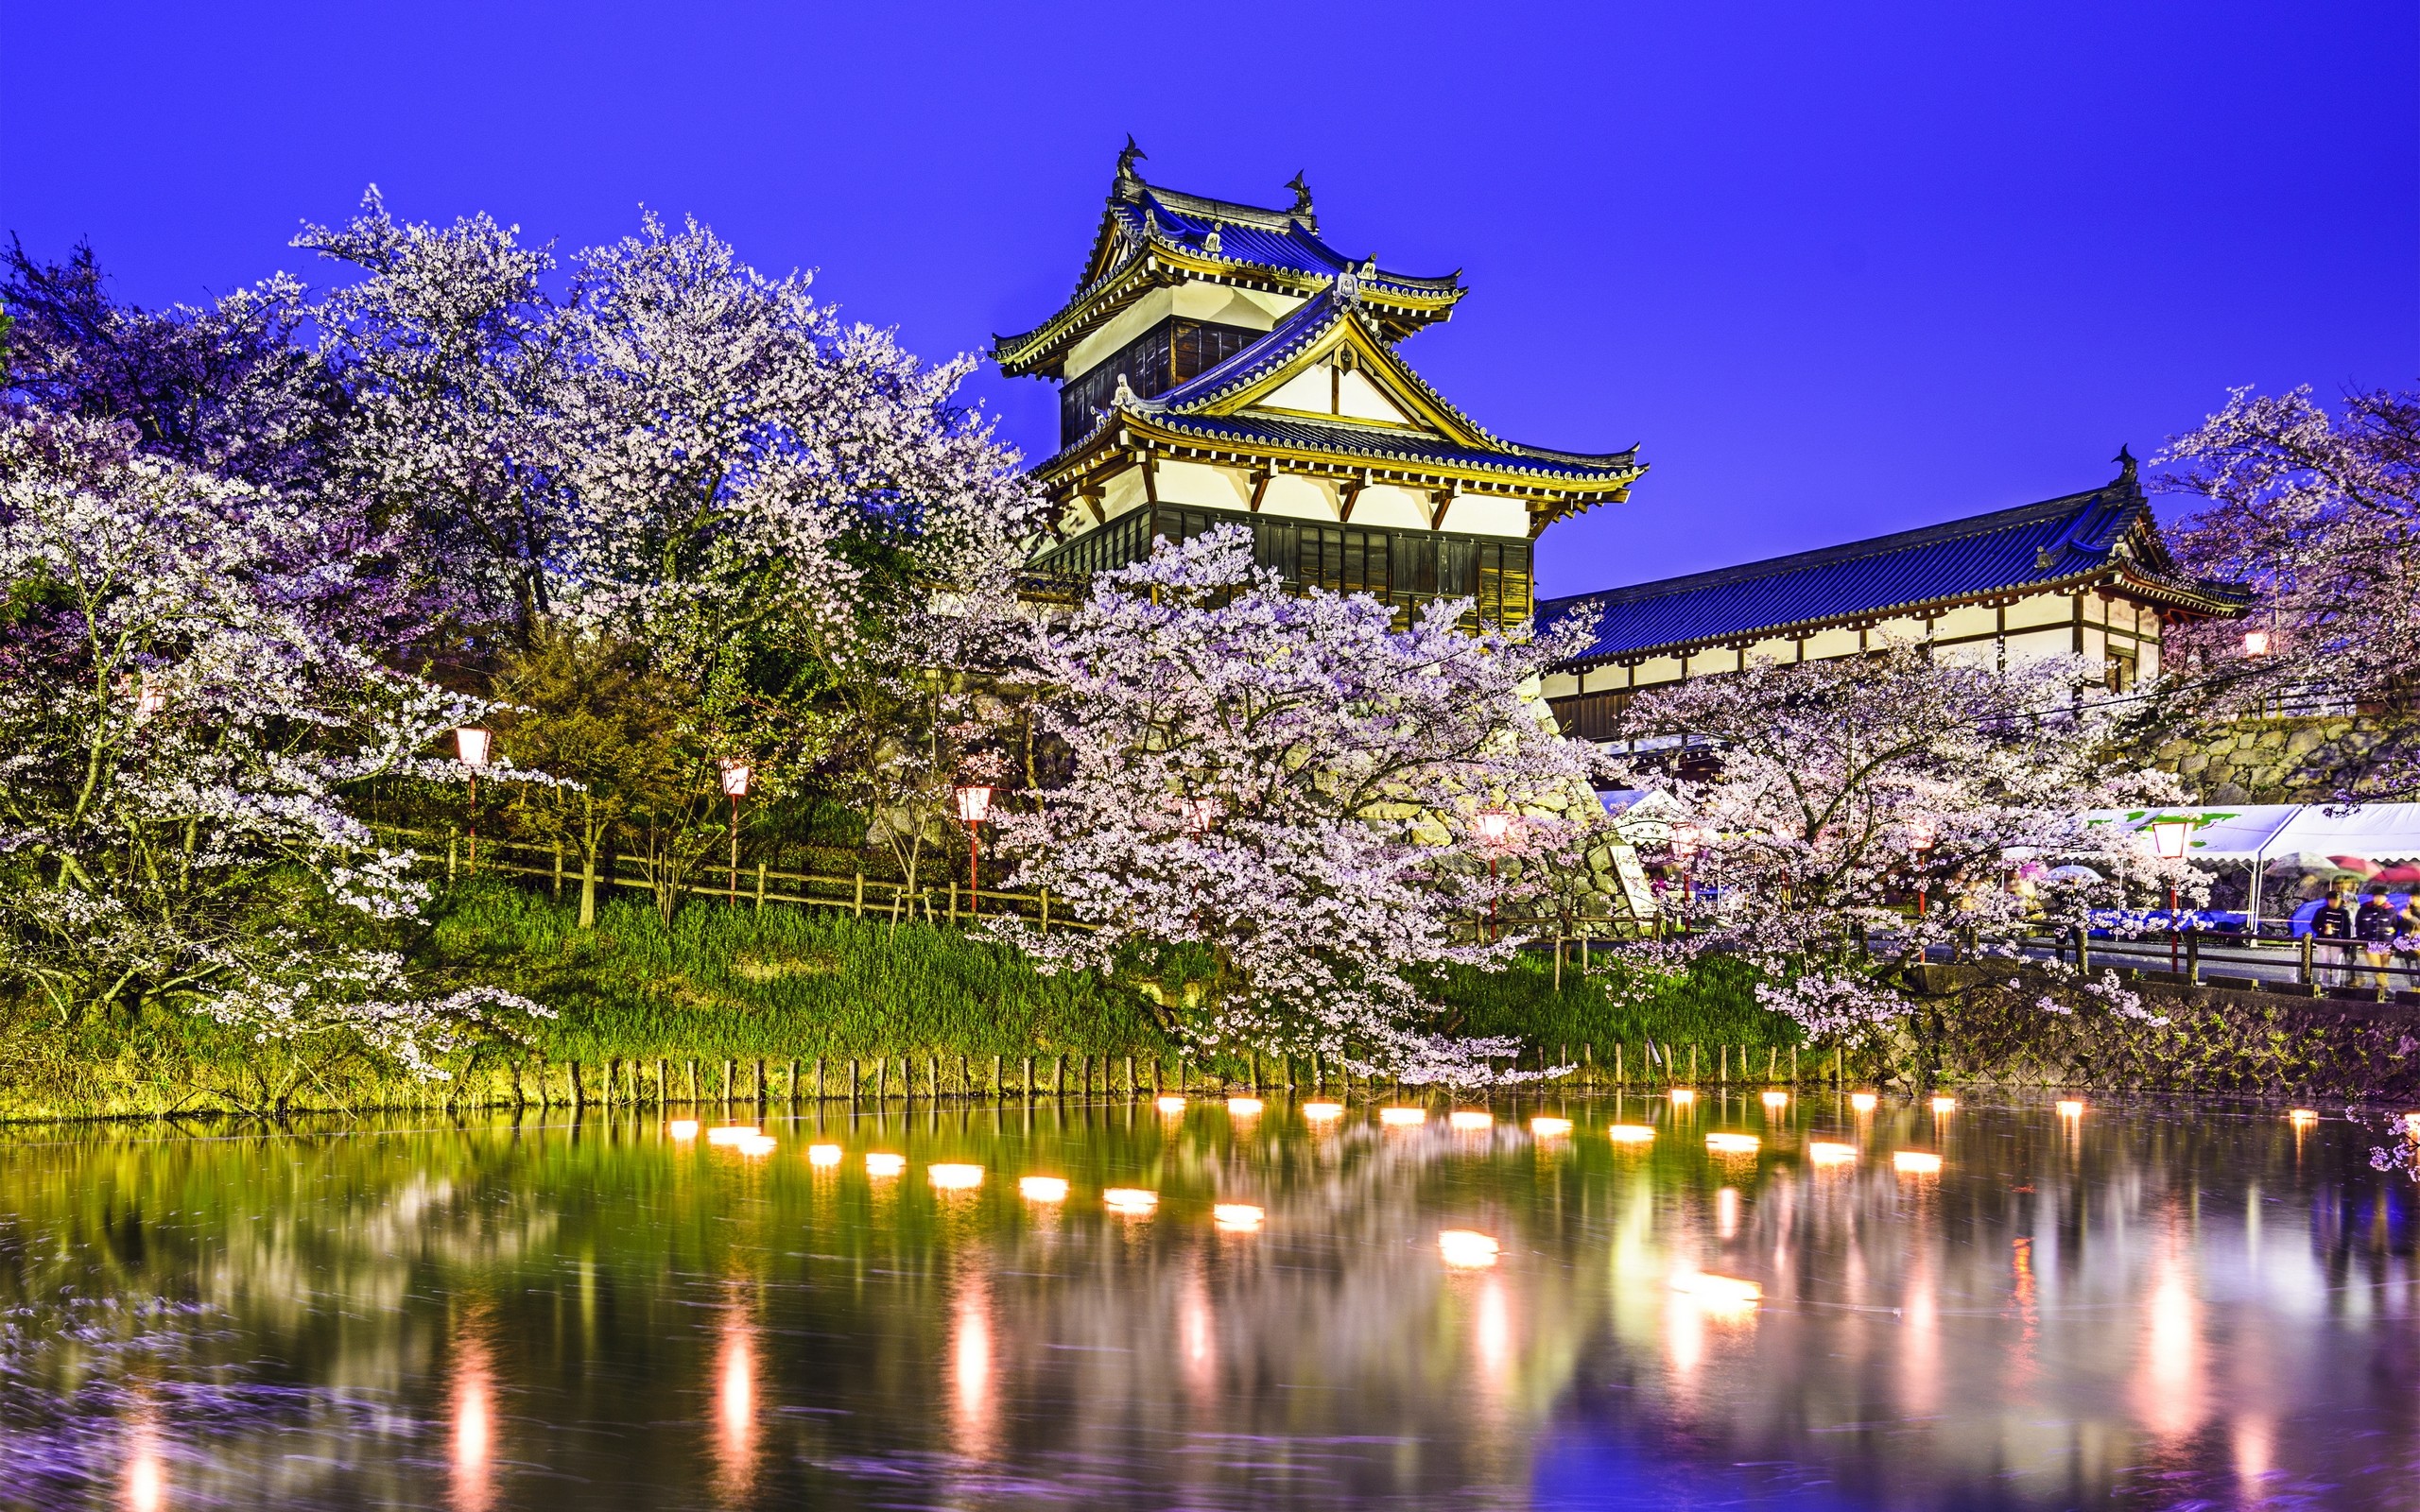 General 2560x1600 Japan architecture cherry blossom water Asia reflection plants